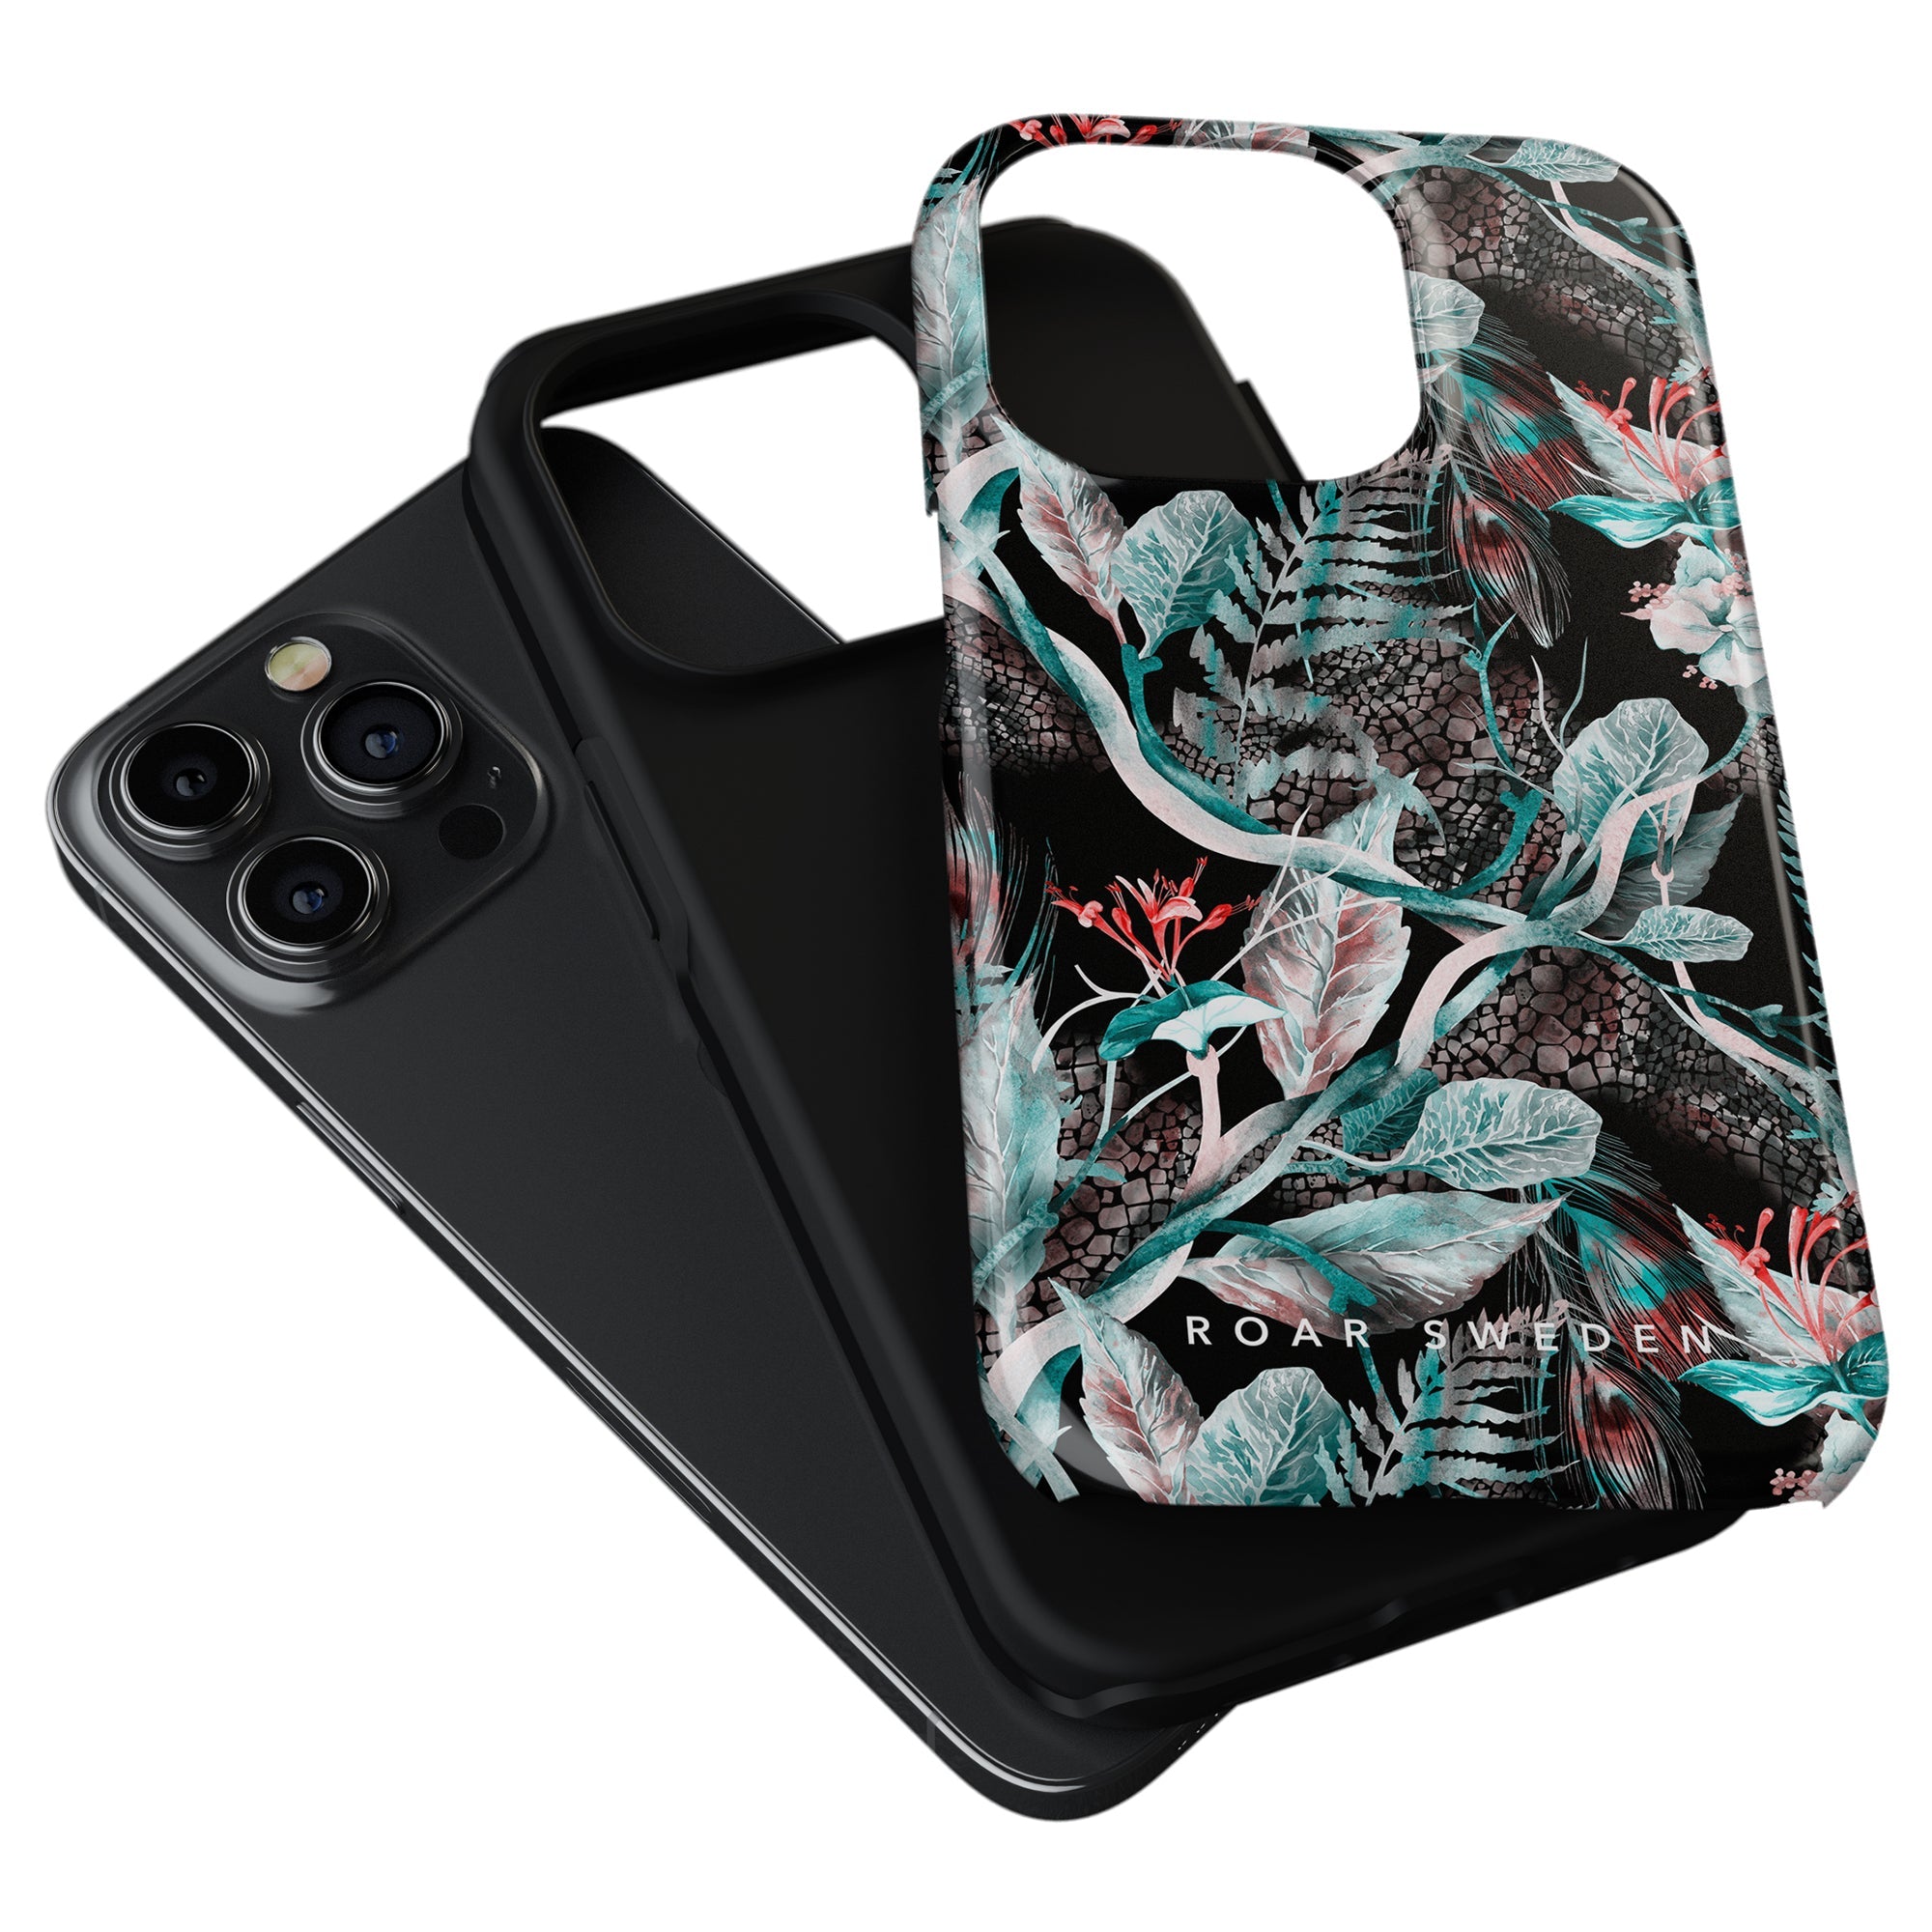 A Snake Jungle - Tough case with a floral pattern on it, perfect for your smartphone.